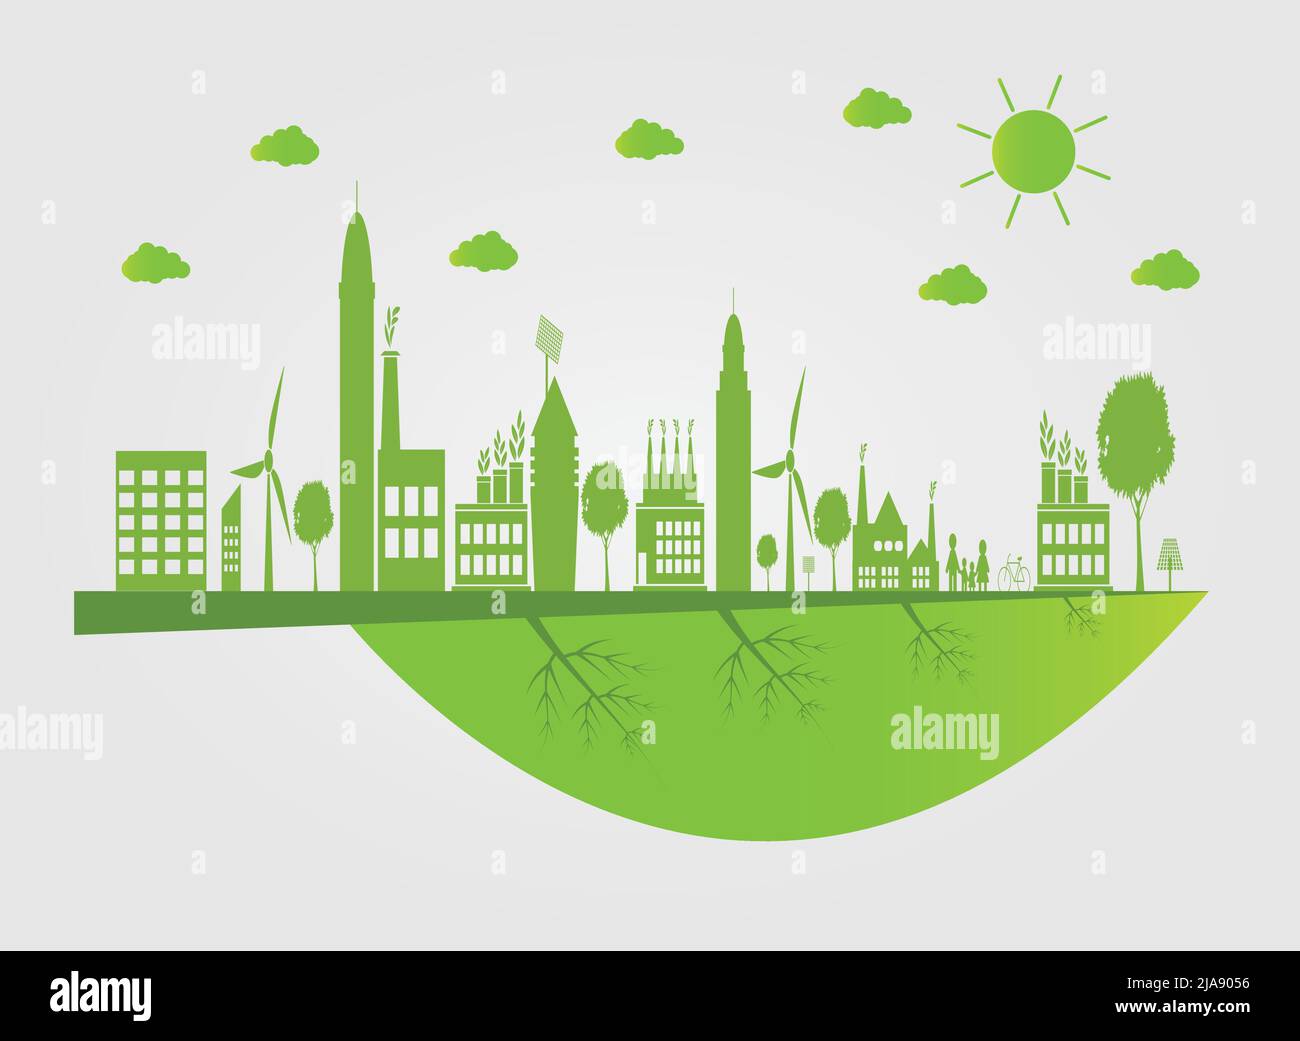 Ecology.Green cities help the world with eco-friendly concept ideas.vector illustration Stock Vector